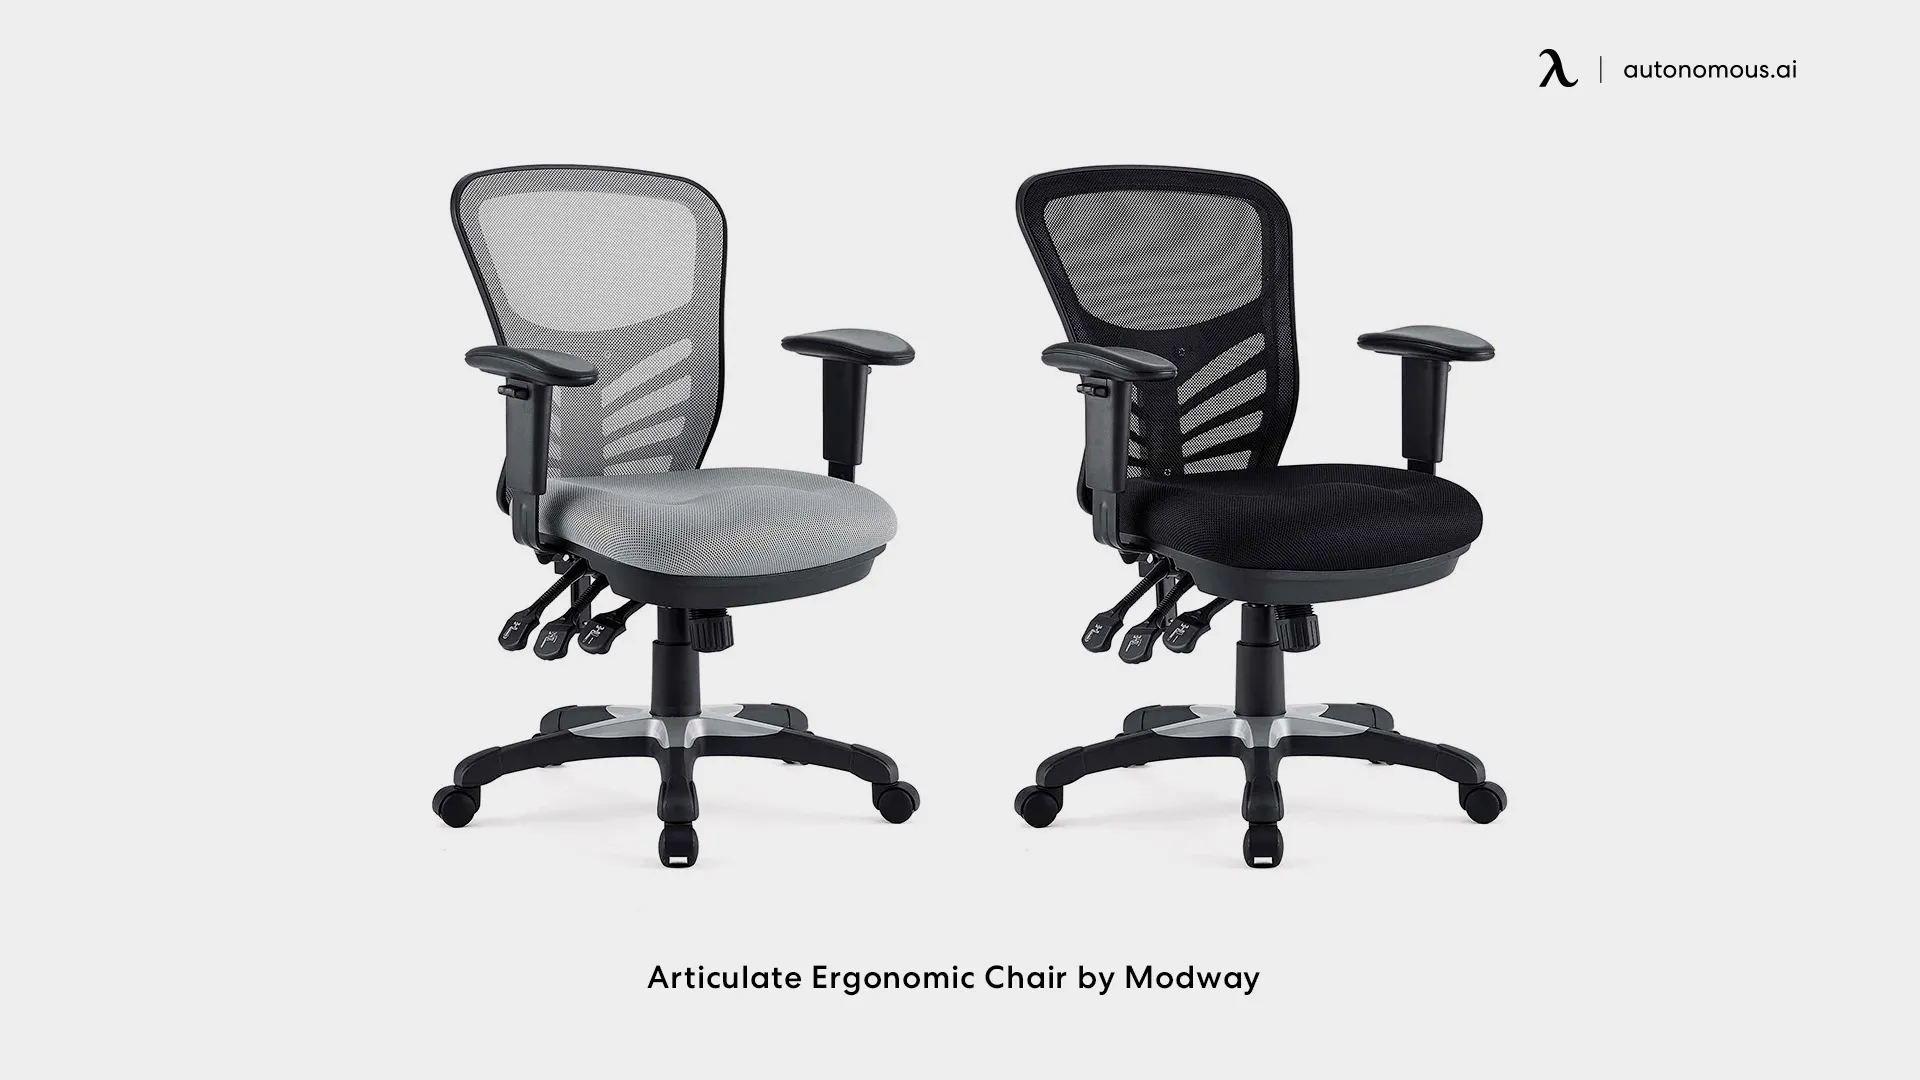 Articulate Ergonomic Chair by Modway